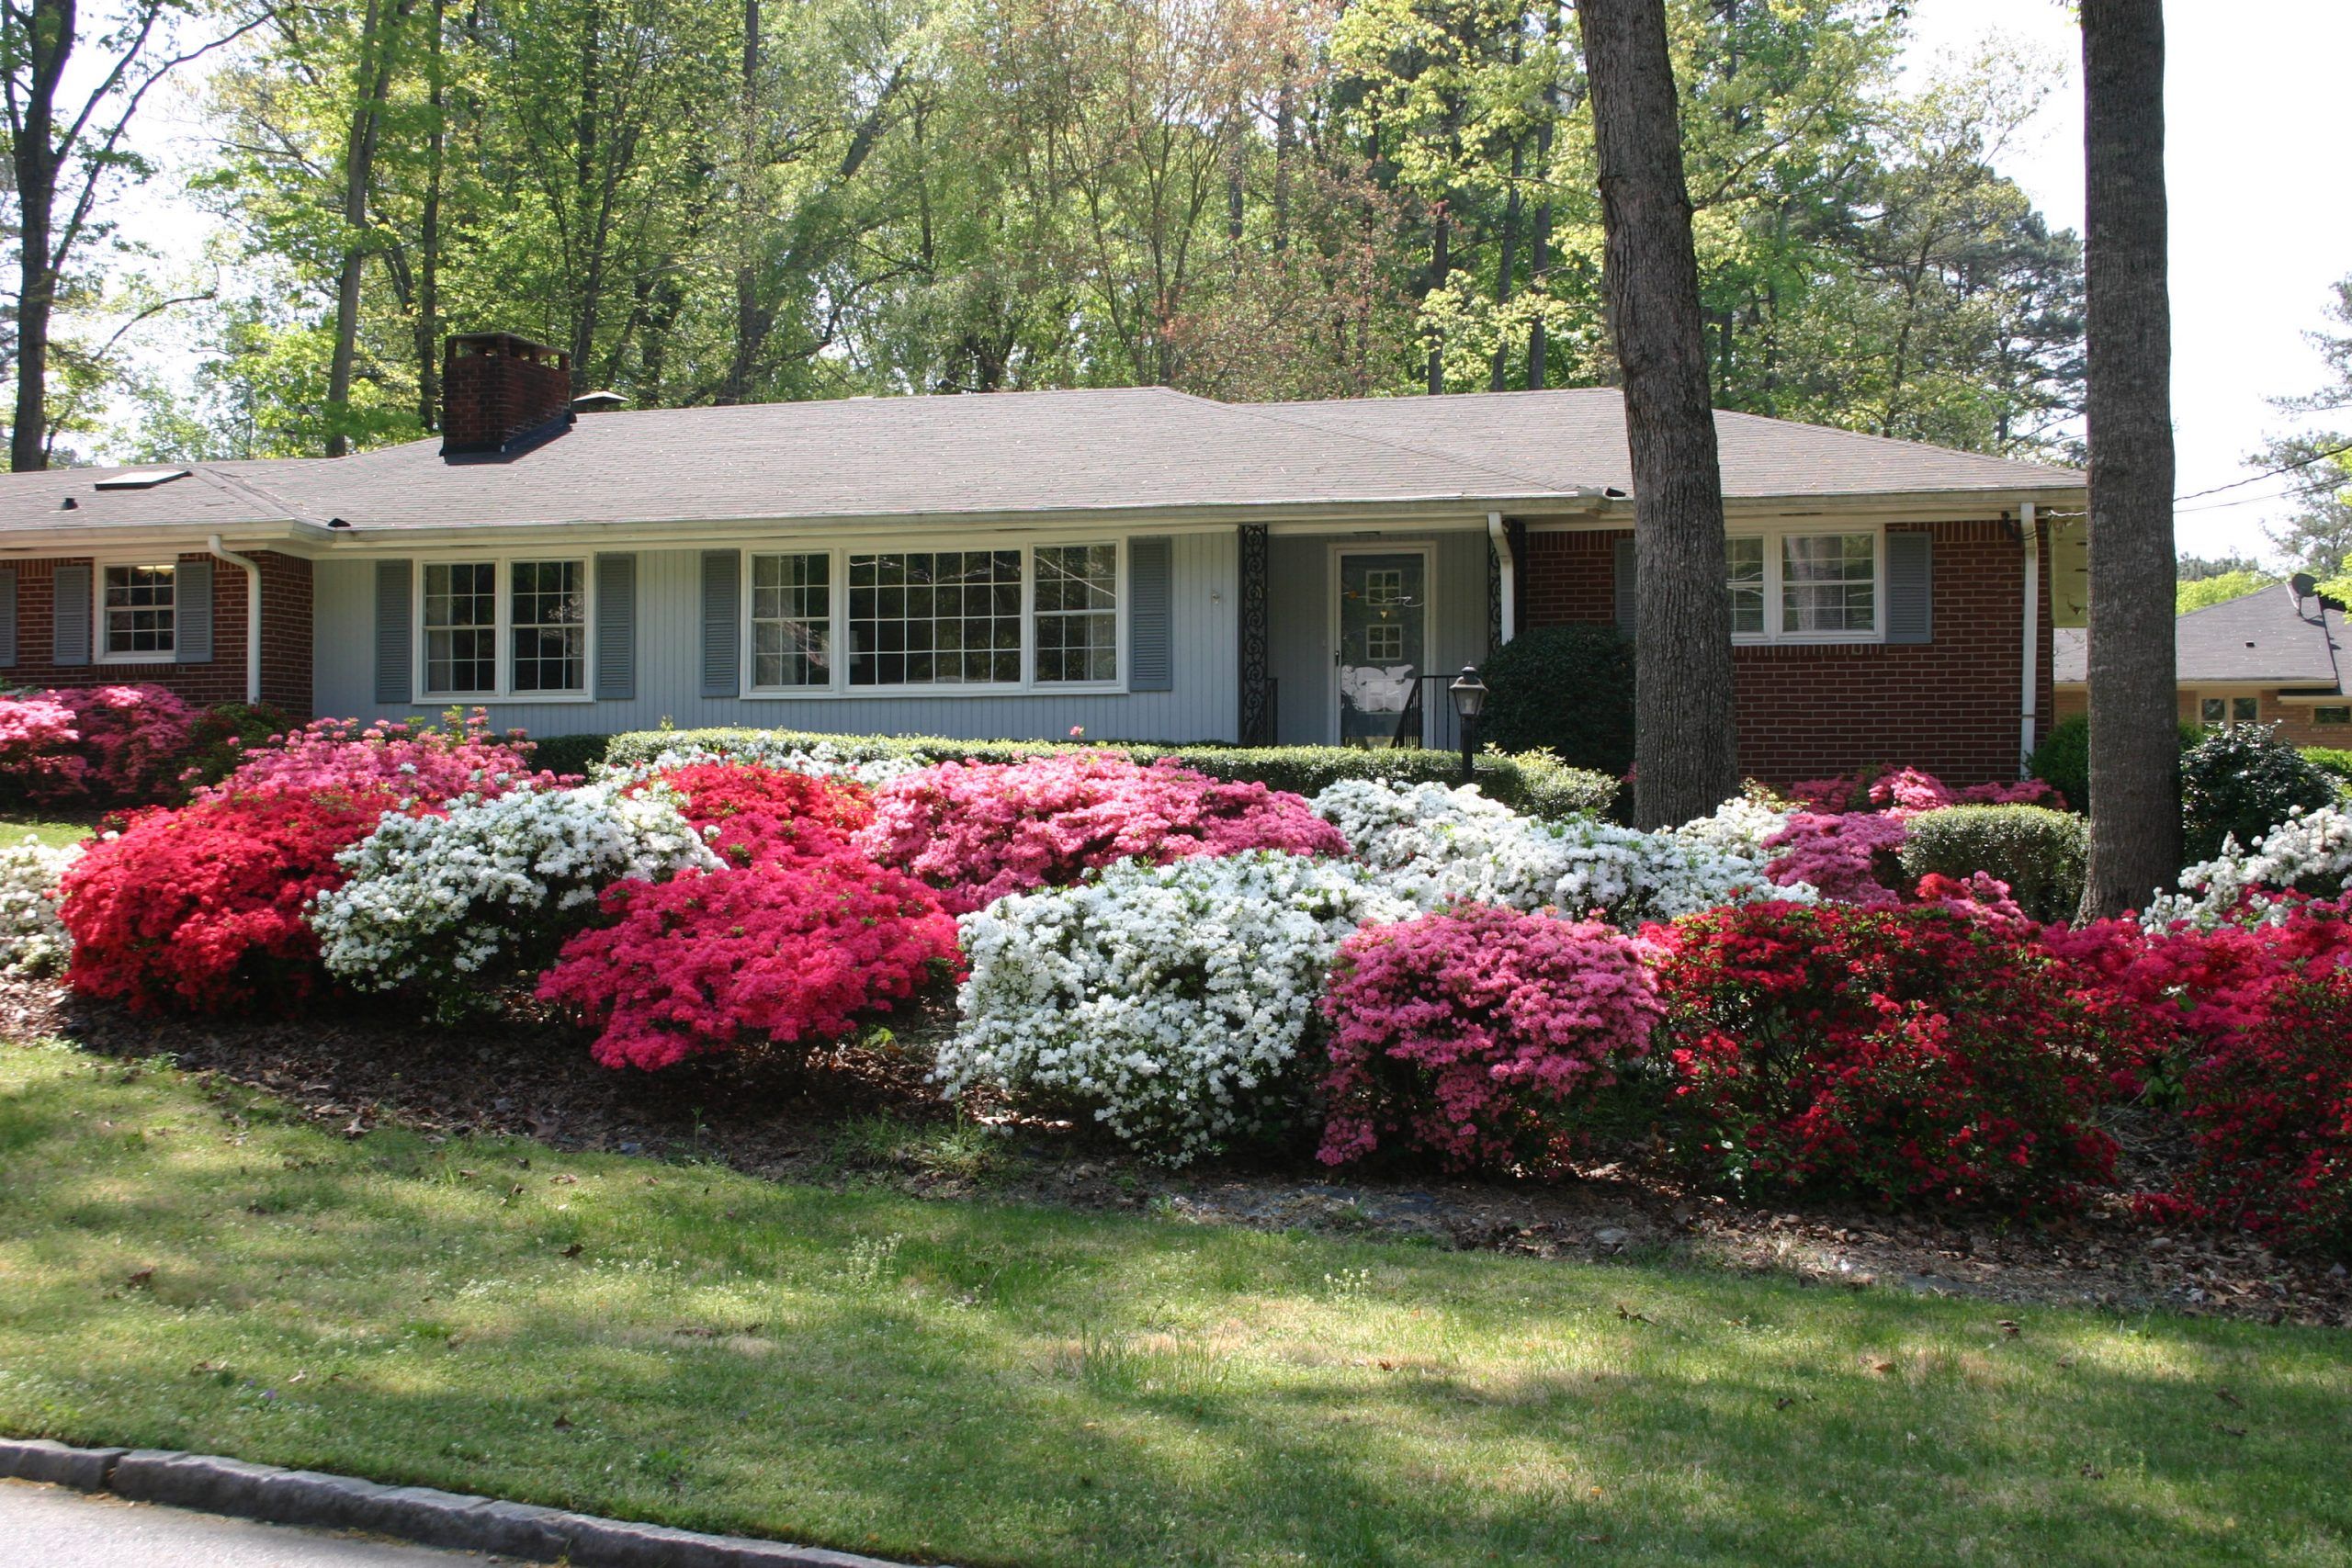 Cluster of Azaleas At Center of Front Yard